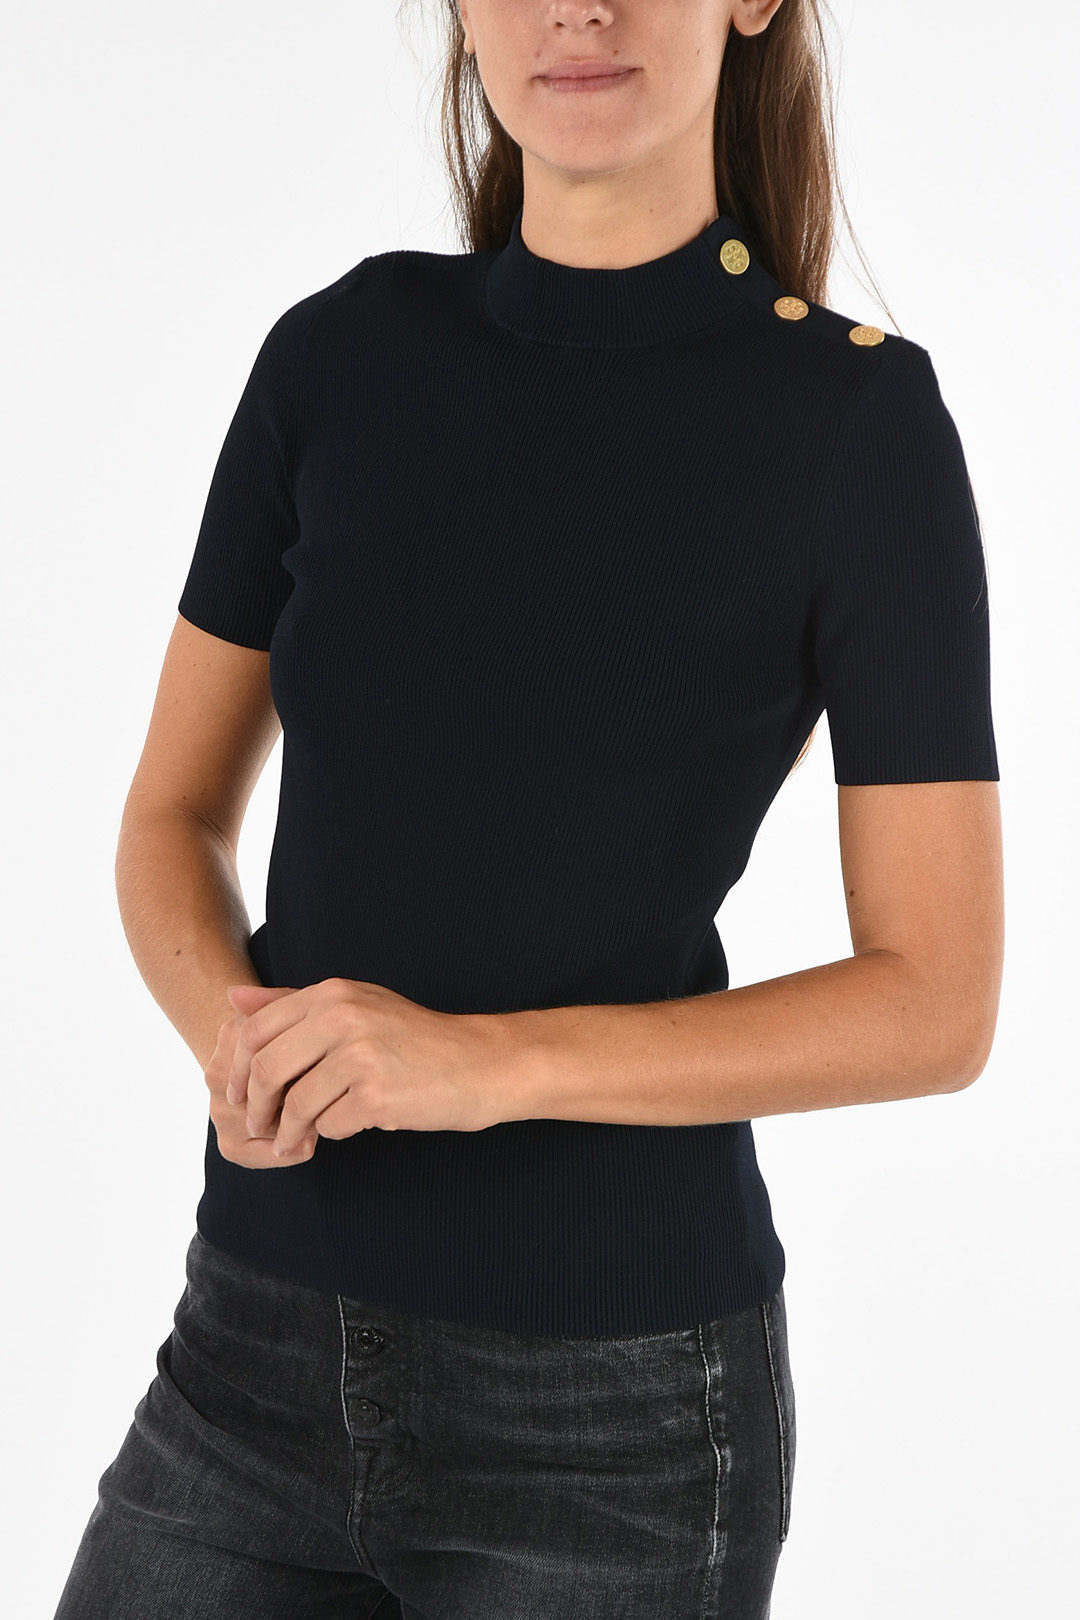 Tory Burch Short Sleeve Ribbed Sweater women - Glamood Outlet